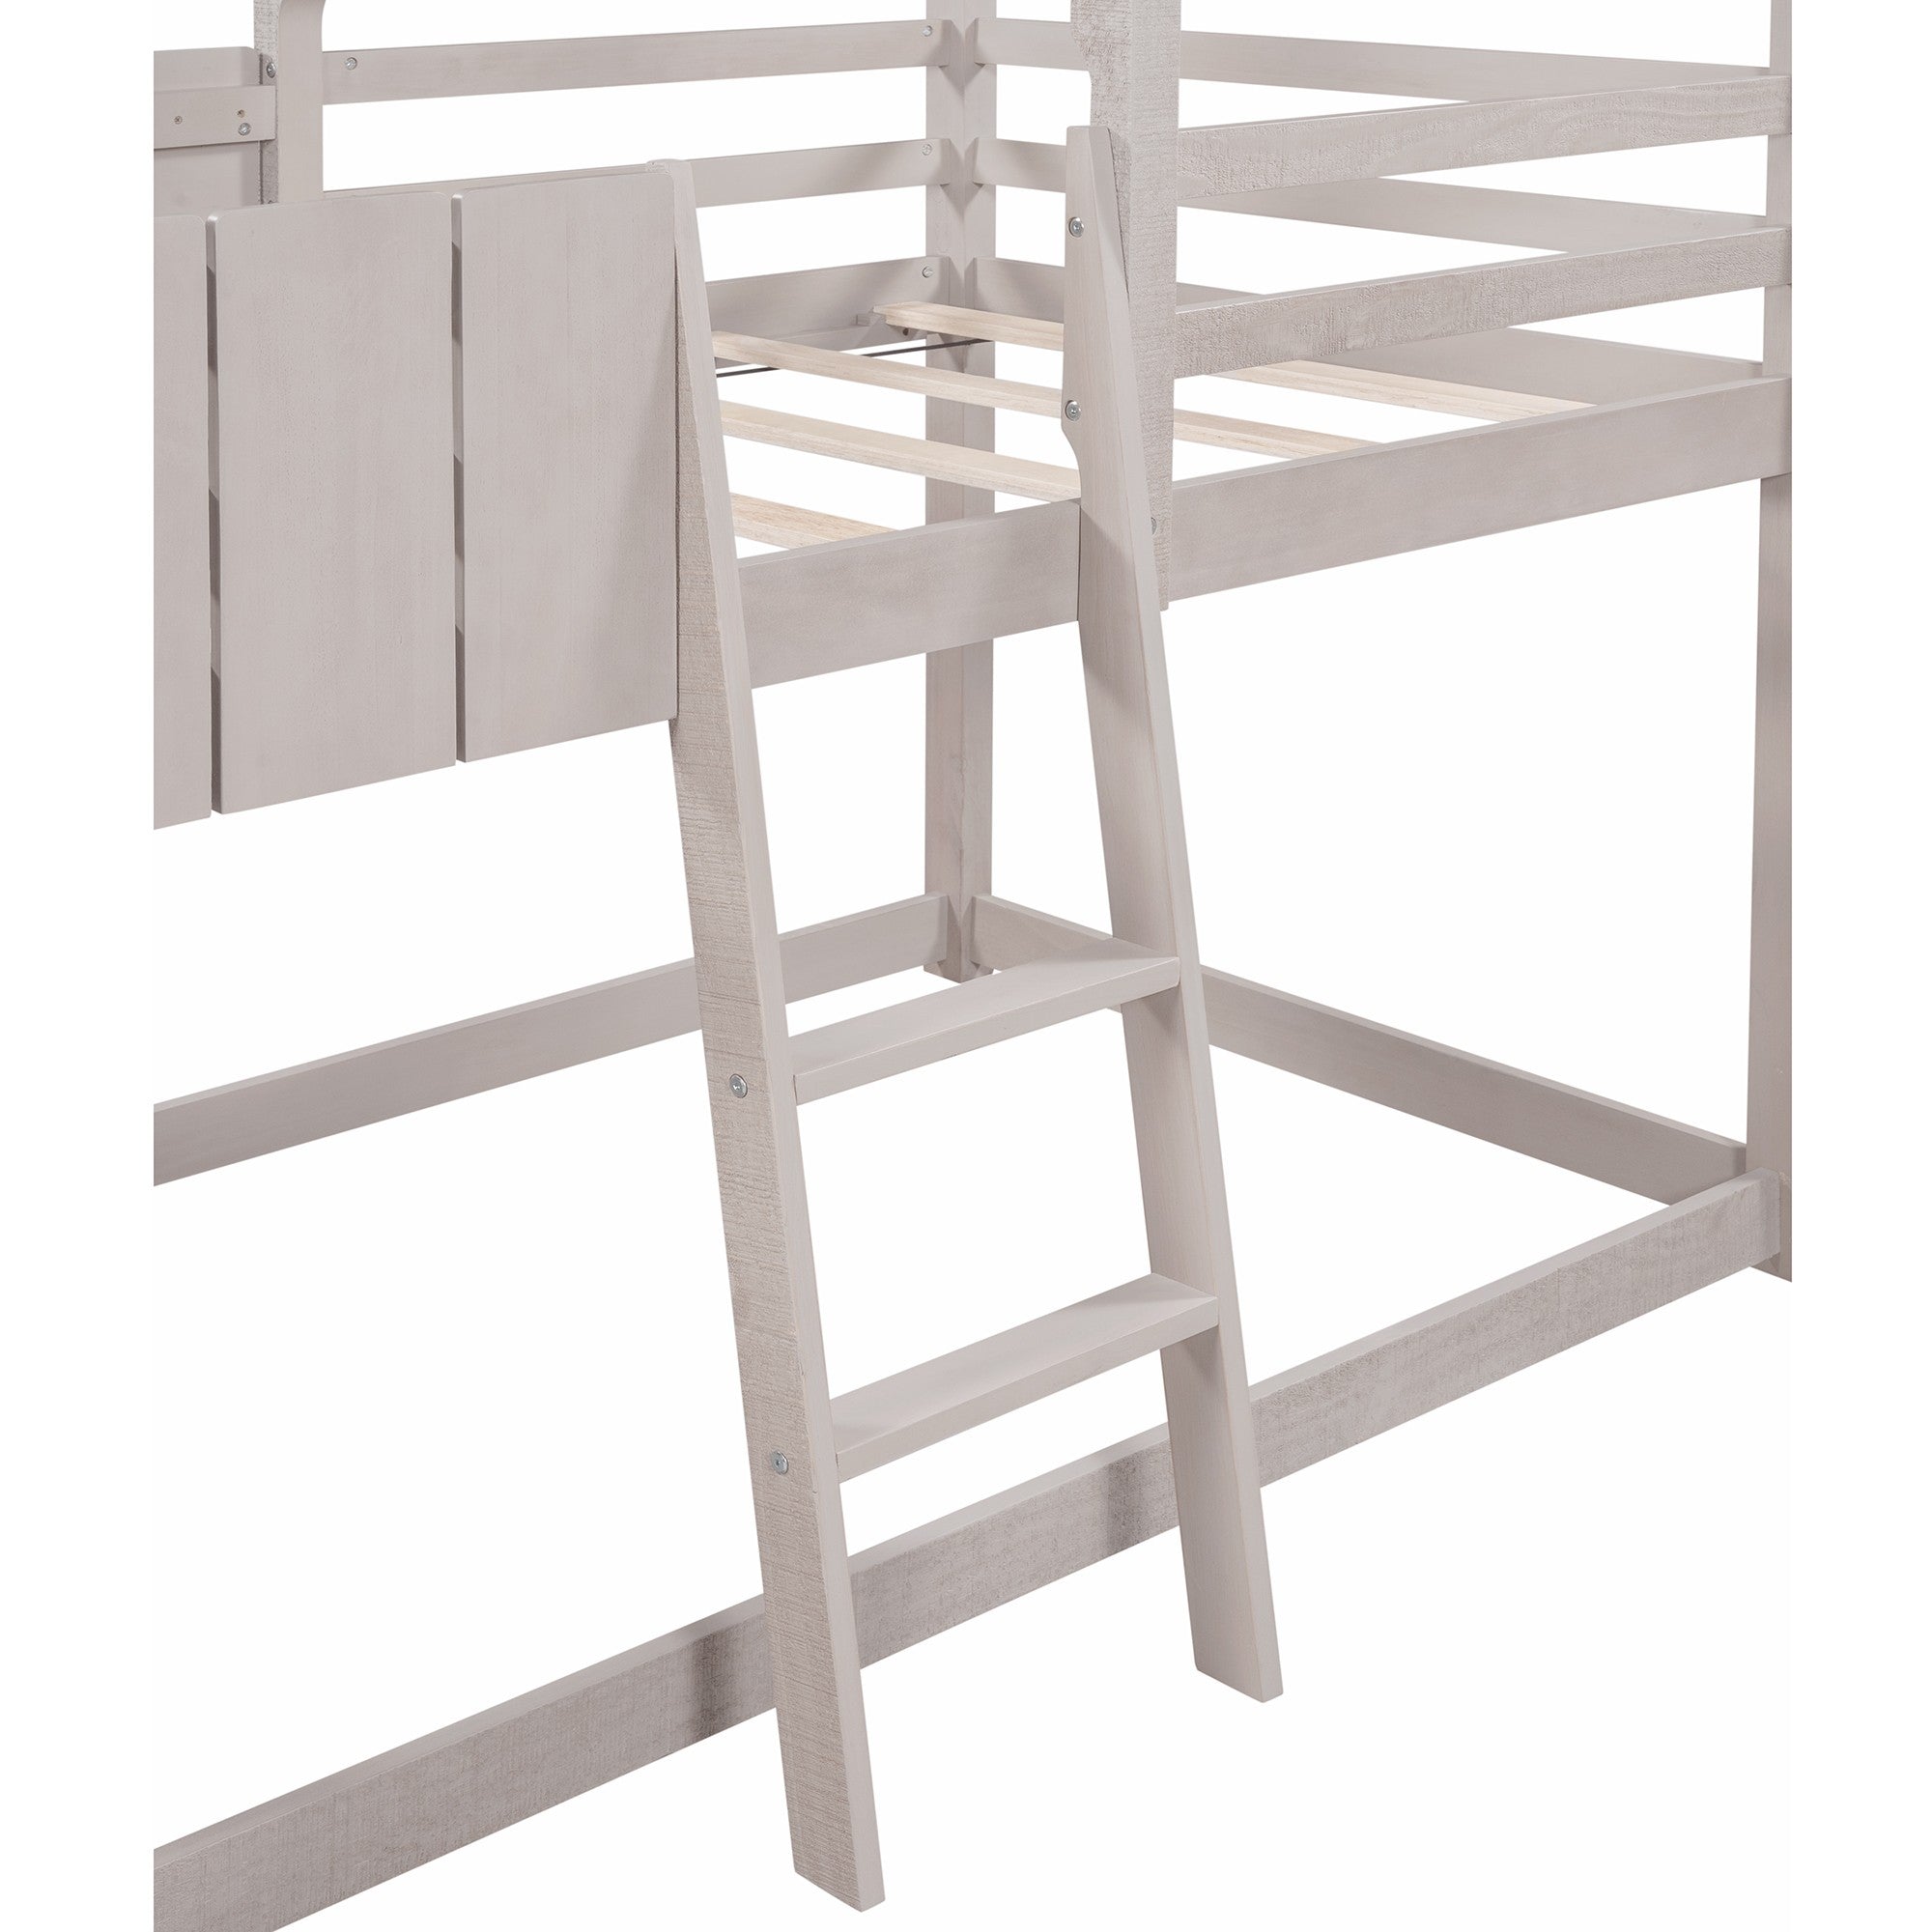 Wash Gray Double Twin Size Bunk Bed with Roof